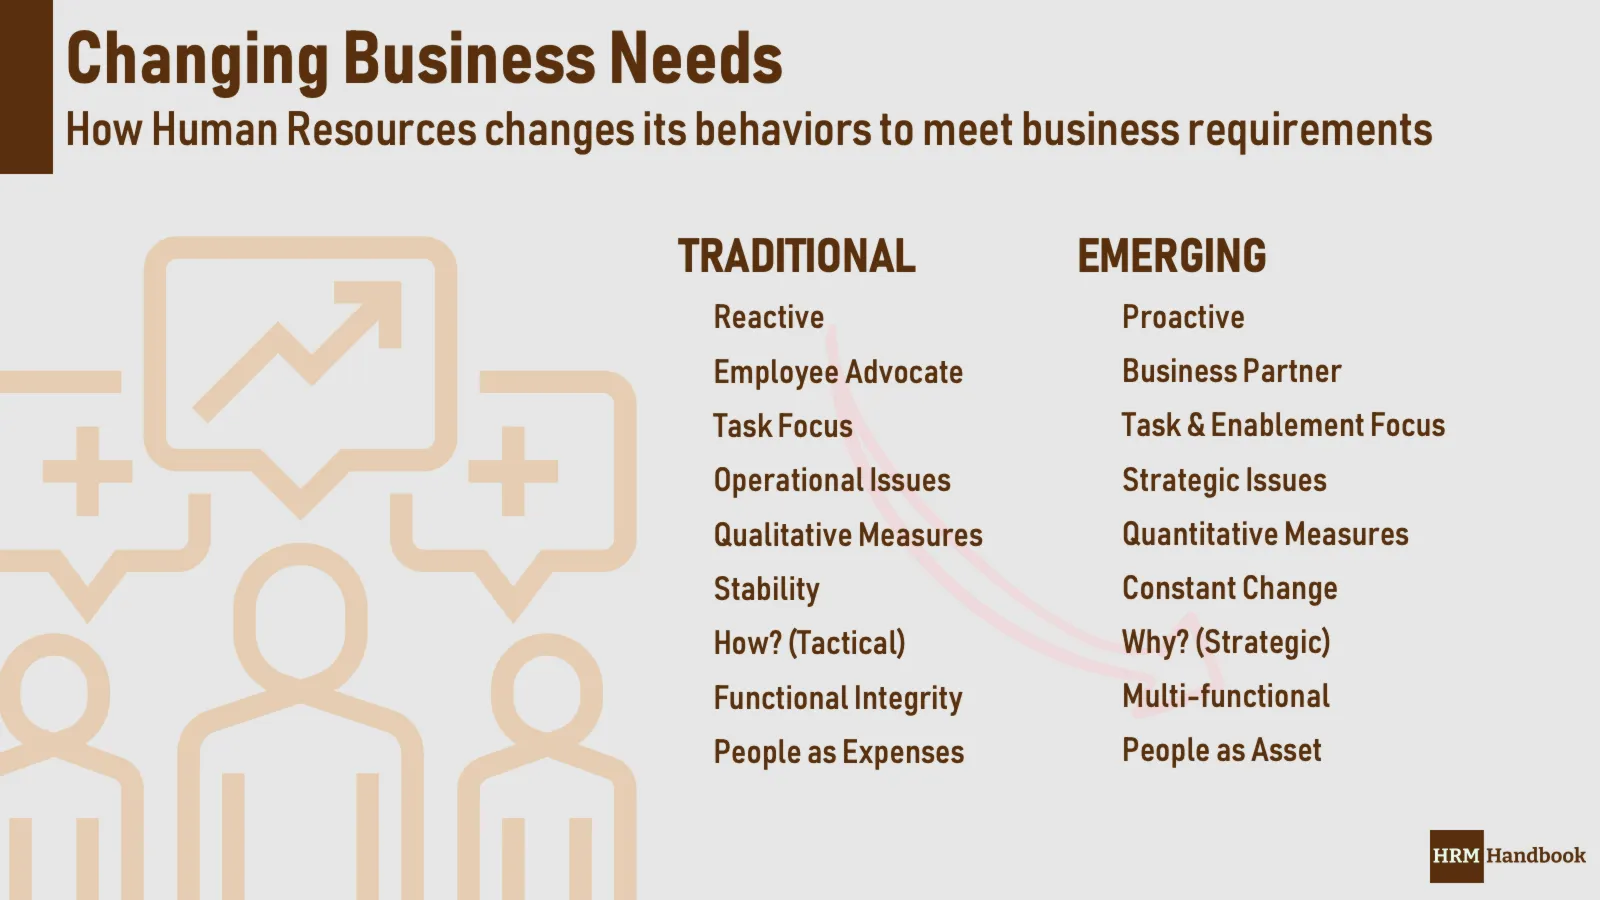 How Changing and Increasing Business Needs impact HR Model and require Human Resources to make a dramatic shift in its scope, responsibilities, roles, competencies and behavior.